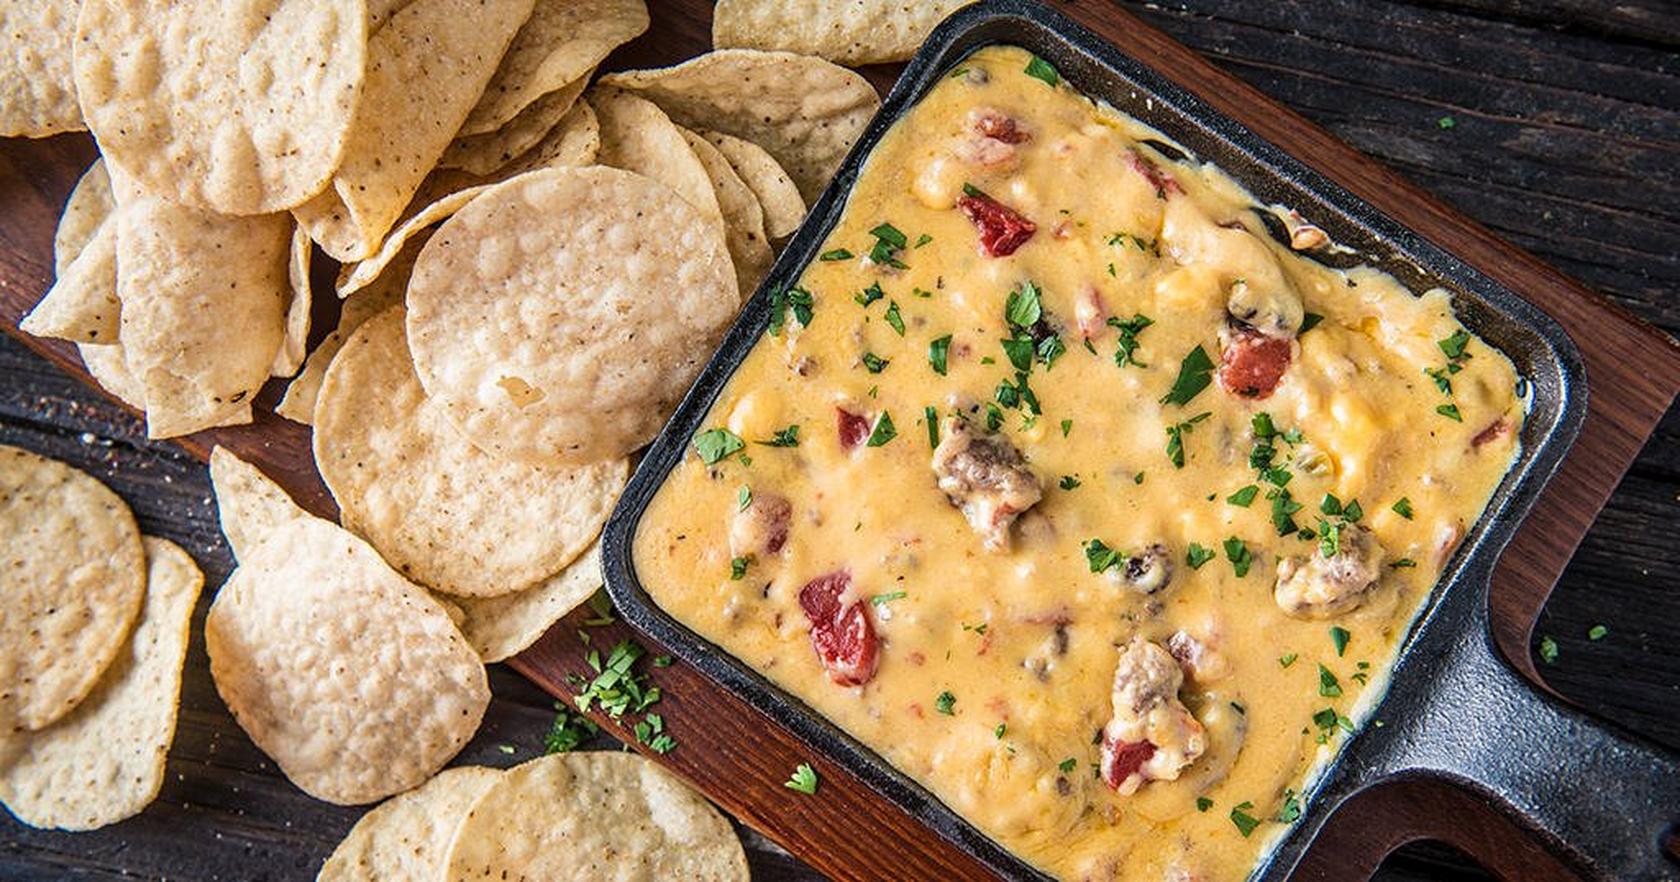 image of Smoked Chili Con Queso by Doug Scheiding